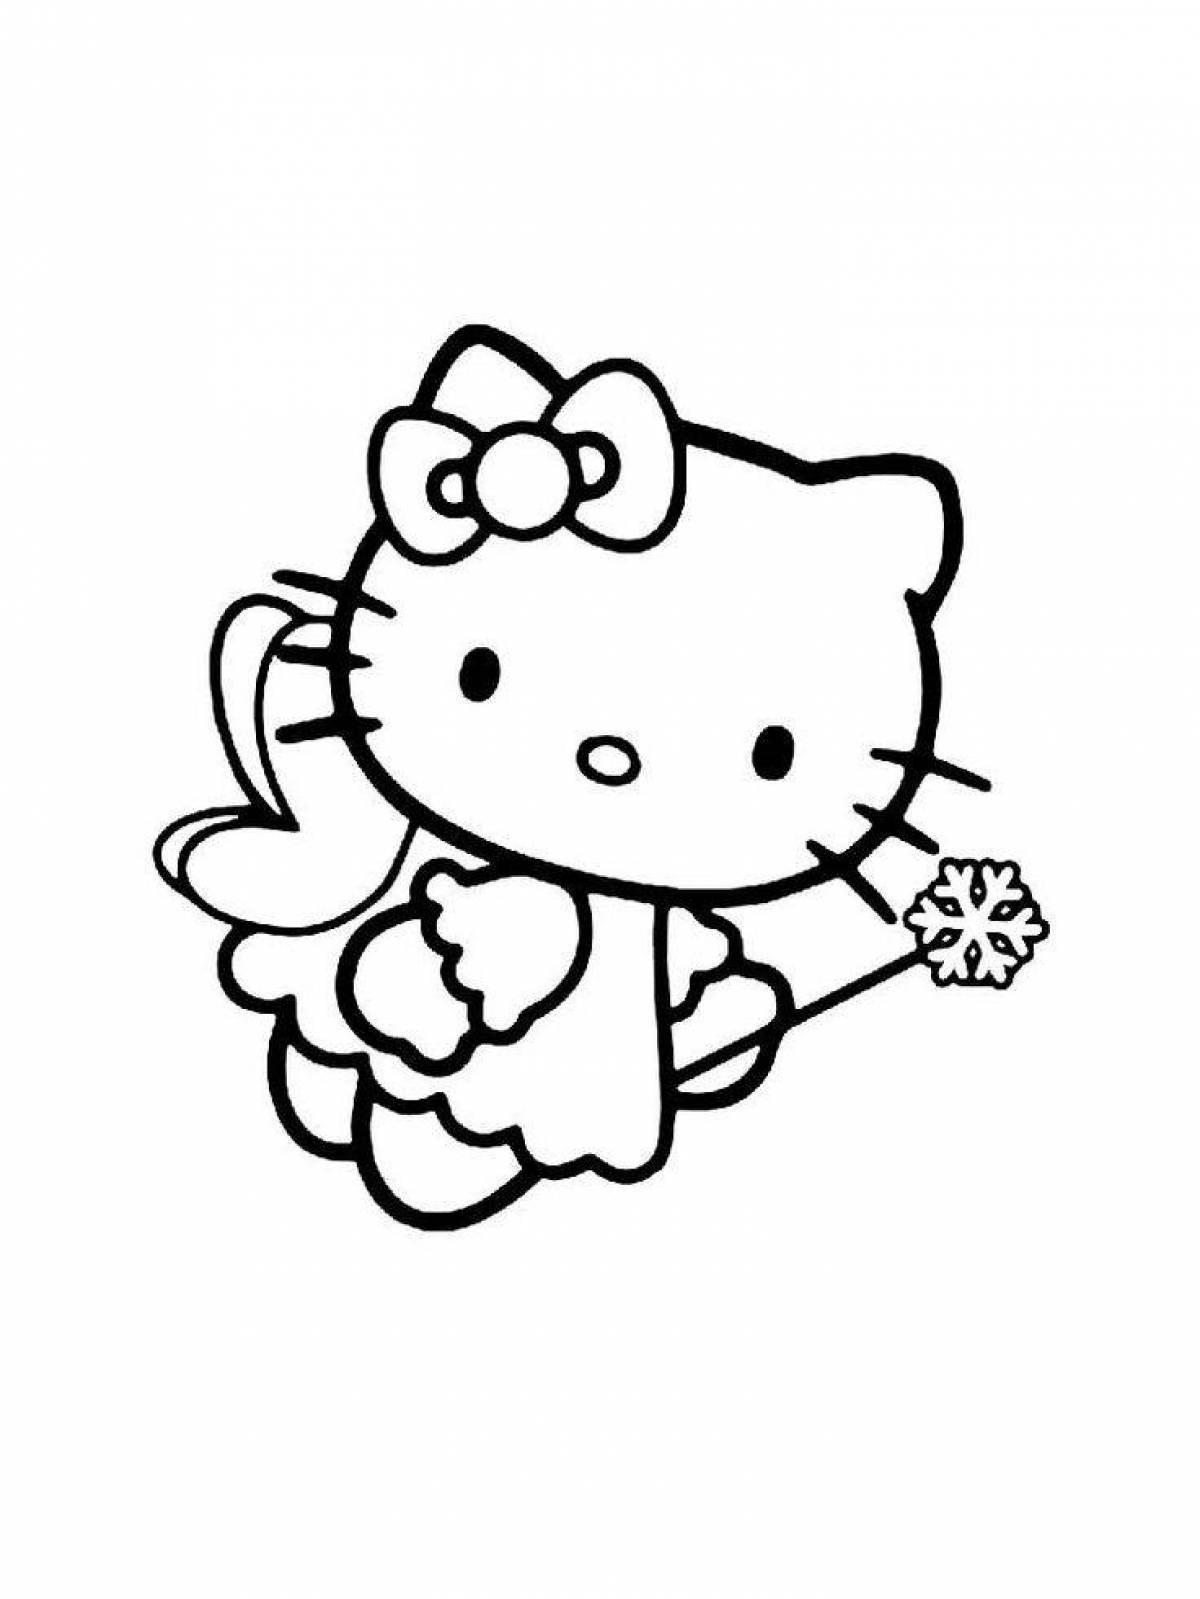 Lively hallow kitty kuromi coloring page